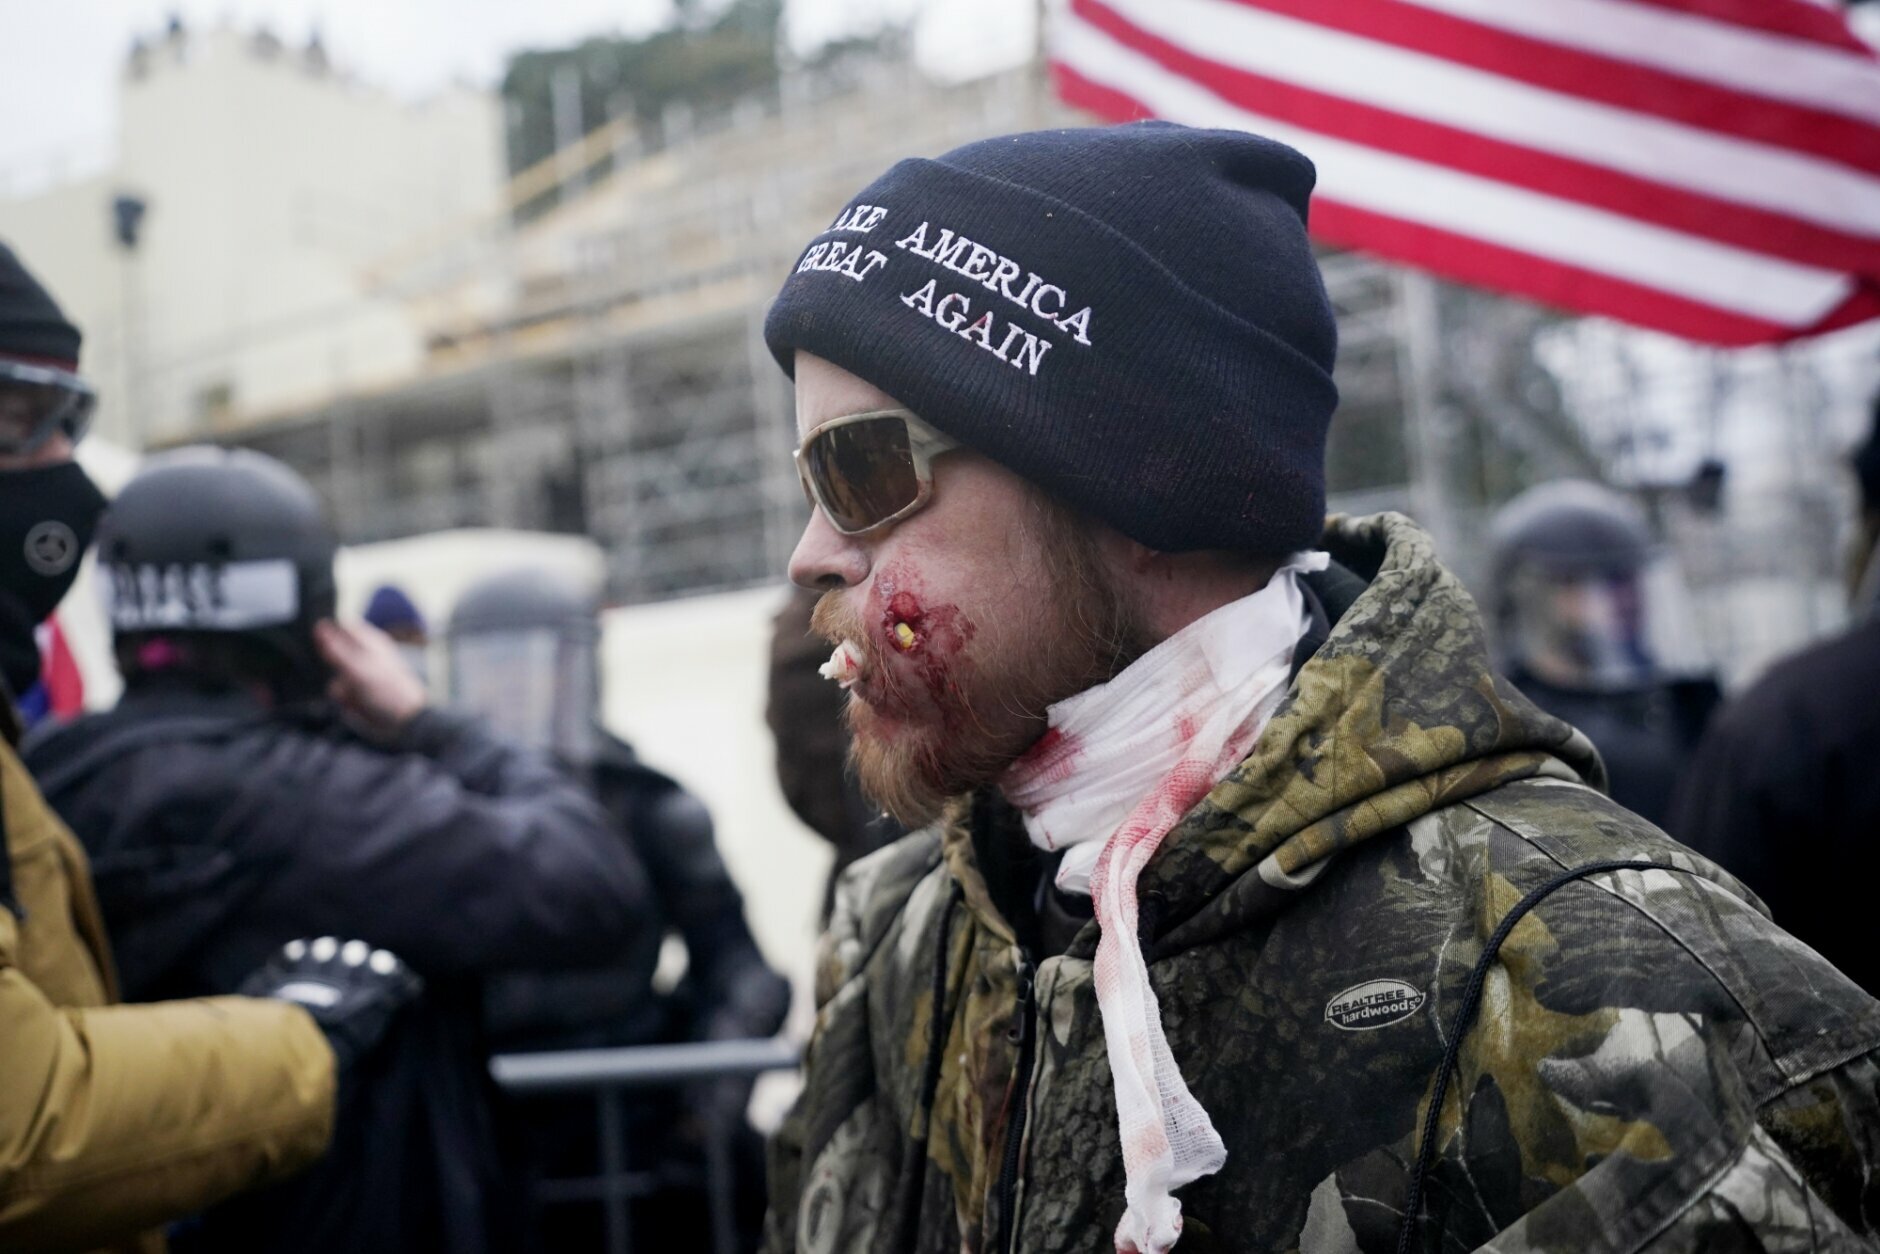 A protester is shown injured during a confrontation with police during a rally Wednesday, Jan. 6, 2021, at the Capitol in Washington. As Congress prepares to affirm President-elect Joe Biden's victory, thousands of people have gathered to show their support for President Donald Trump and his claims of election fraud. (AP Photo/Julio Cortez)